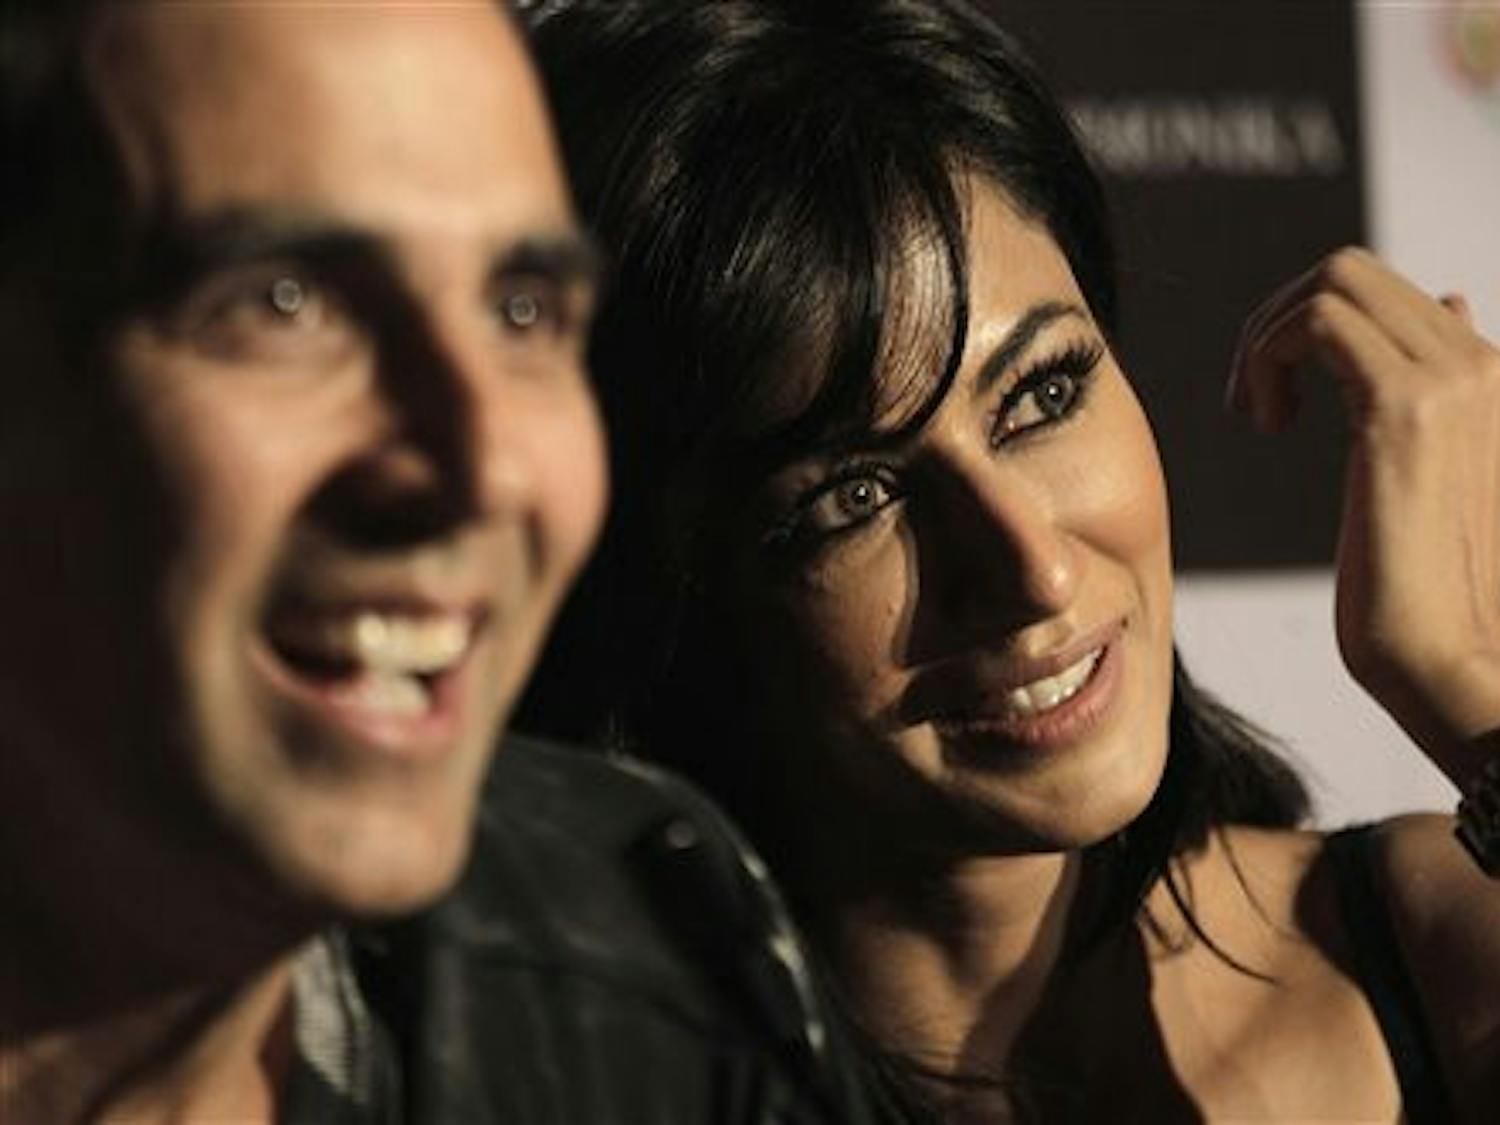 Actors Akshay Kumar and Chitrangada Singh speak at a news conference promoting their film "Desi Boyz," releasing Friday. "Desi Boyz" is the fifth film Kumar has appeared in during 2011 and the third film Singh has appeared in this year. Co-star John Abraham, not pictured, has been in four films this year, including "Desi Boyz."